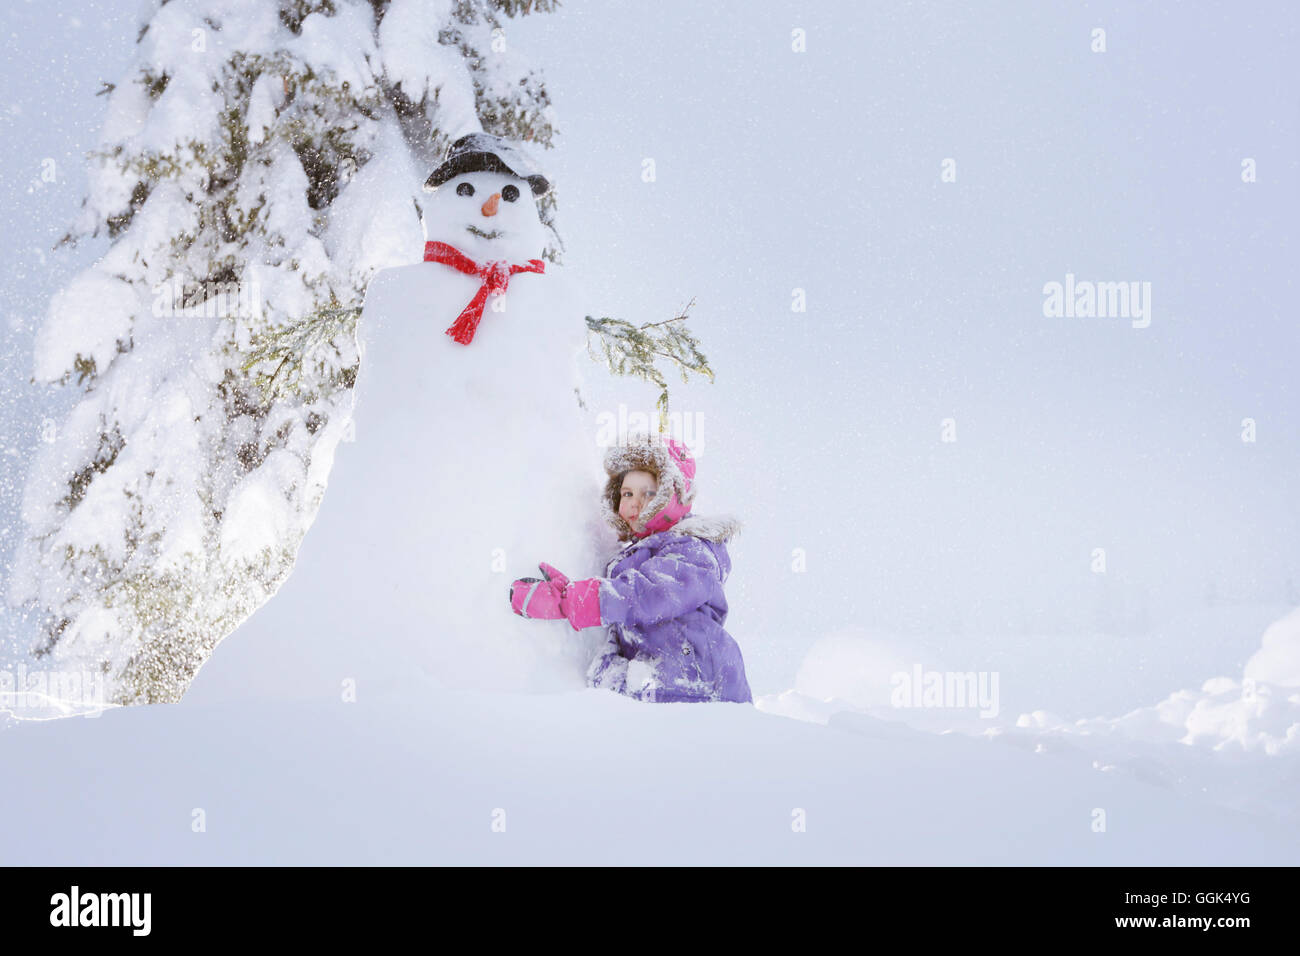 Girl crouching beside a snowman, Passo Monte Croce di Comelico, South Tyrol, Italy Stock Photo